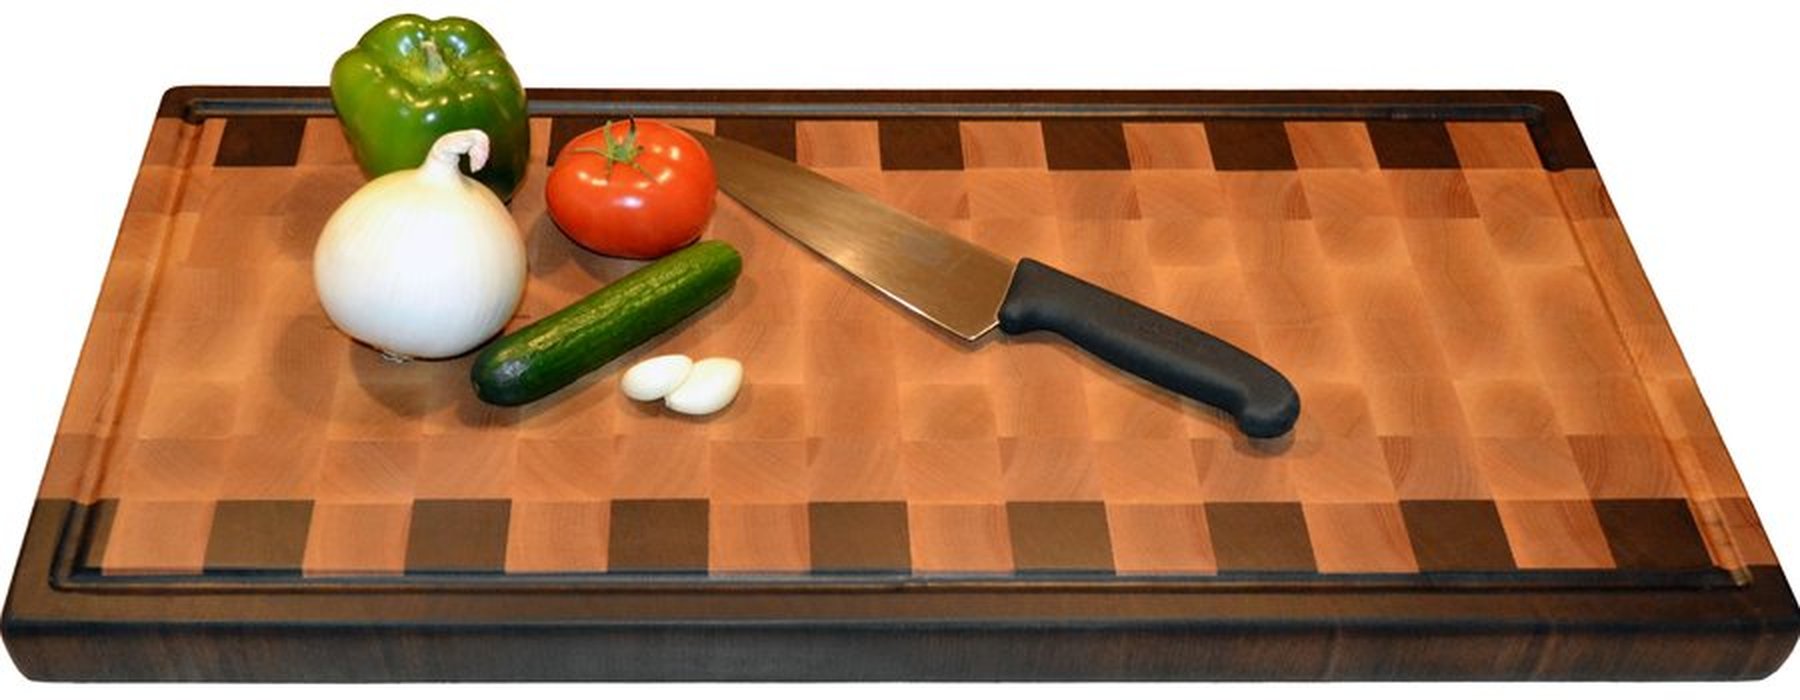 5 Tips to create the PERFECT cutting board 